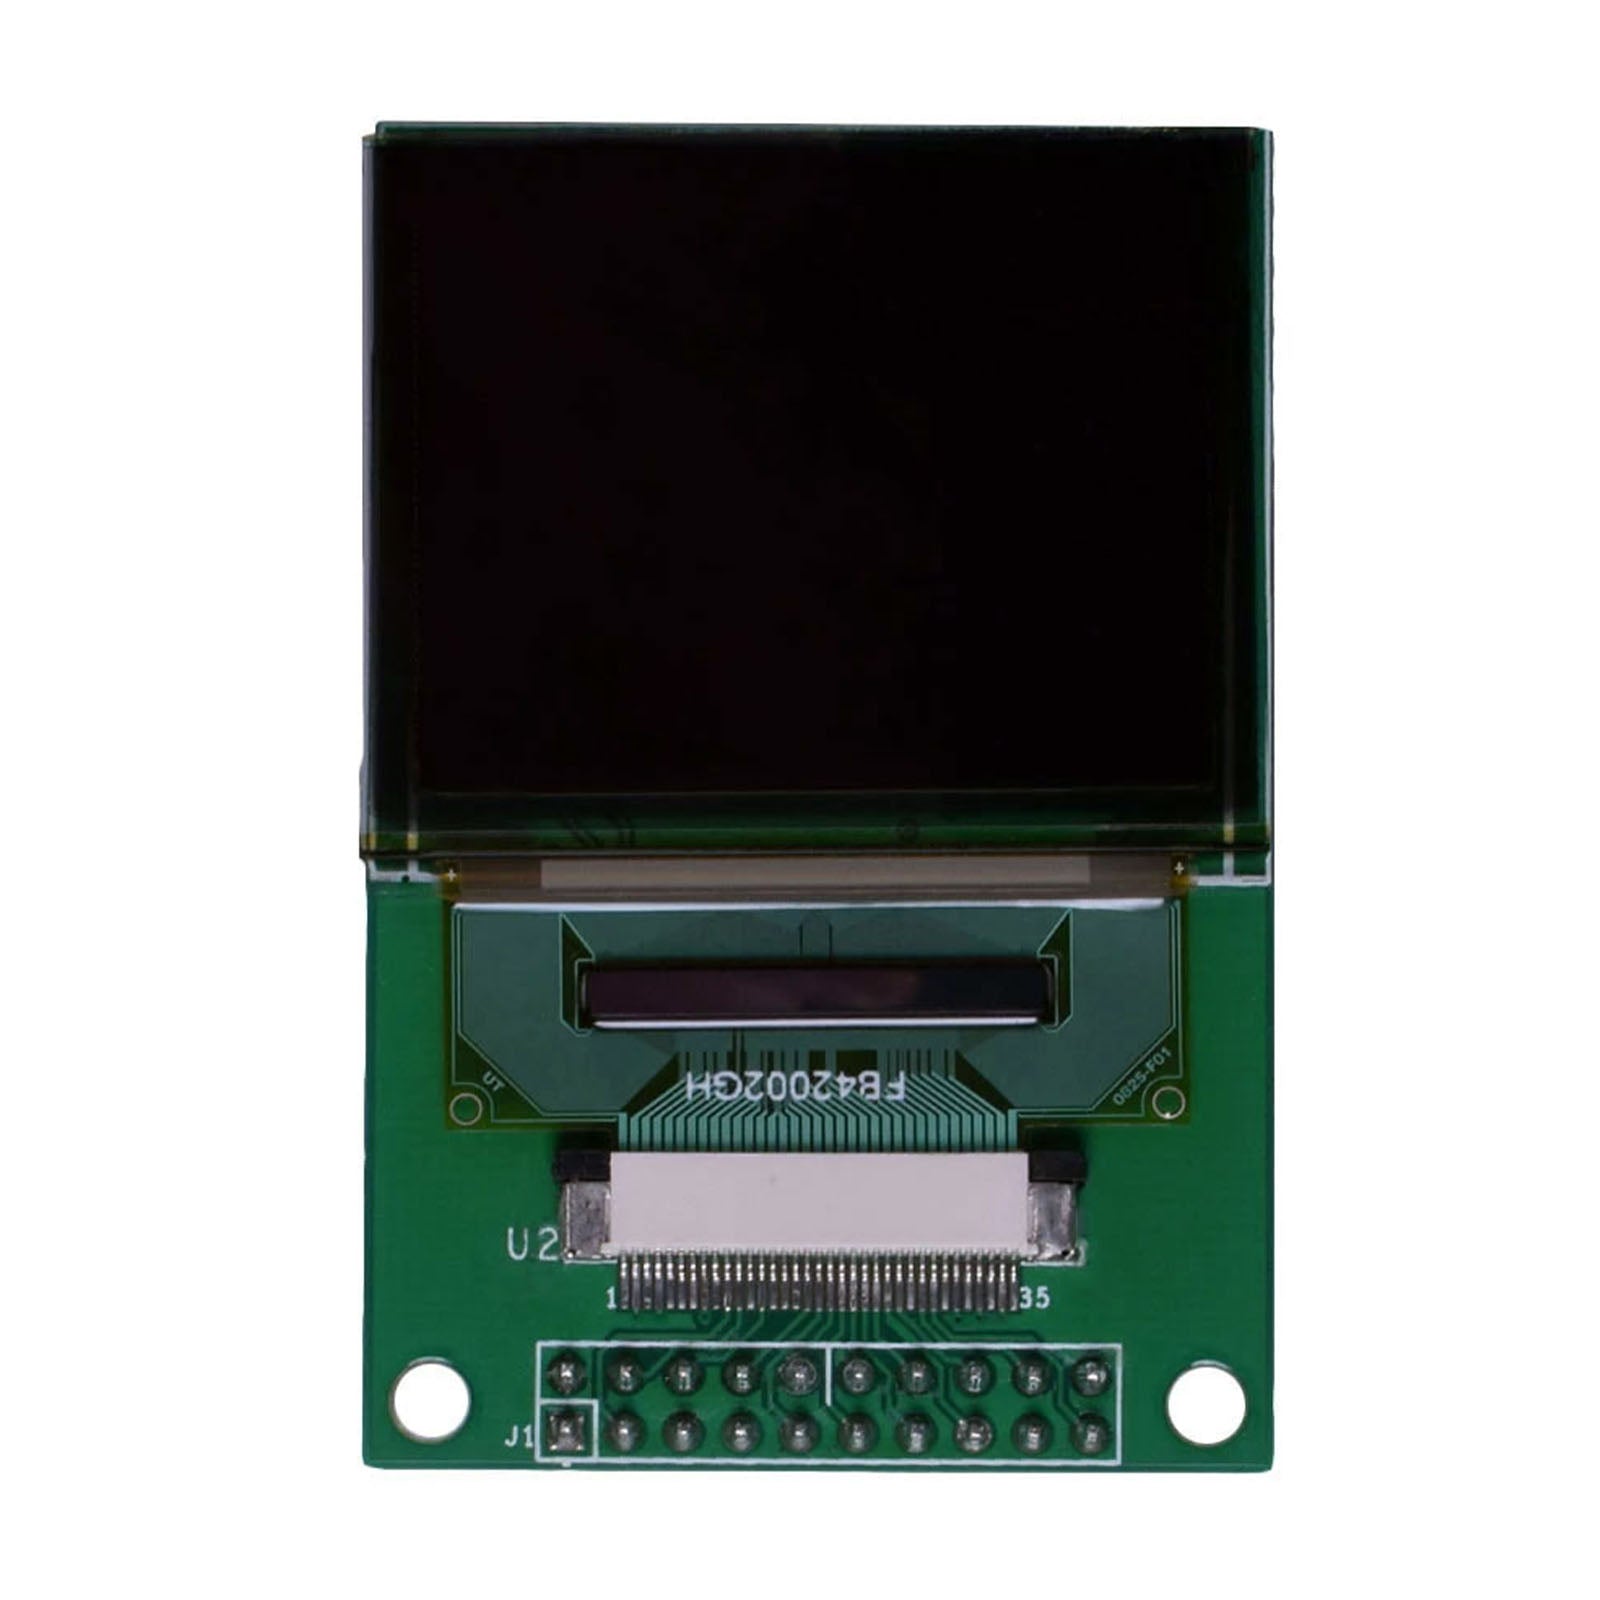 1.69-inch OLED Graphic Display Module with a resolution of 160 by 128 pixels in RGB color, compatible with MCU and SPI interfaces